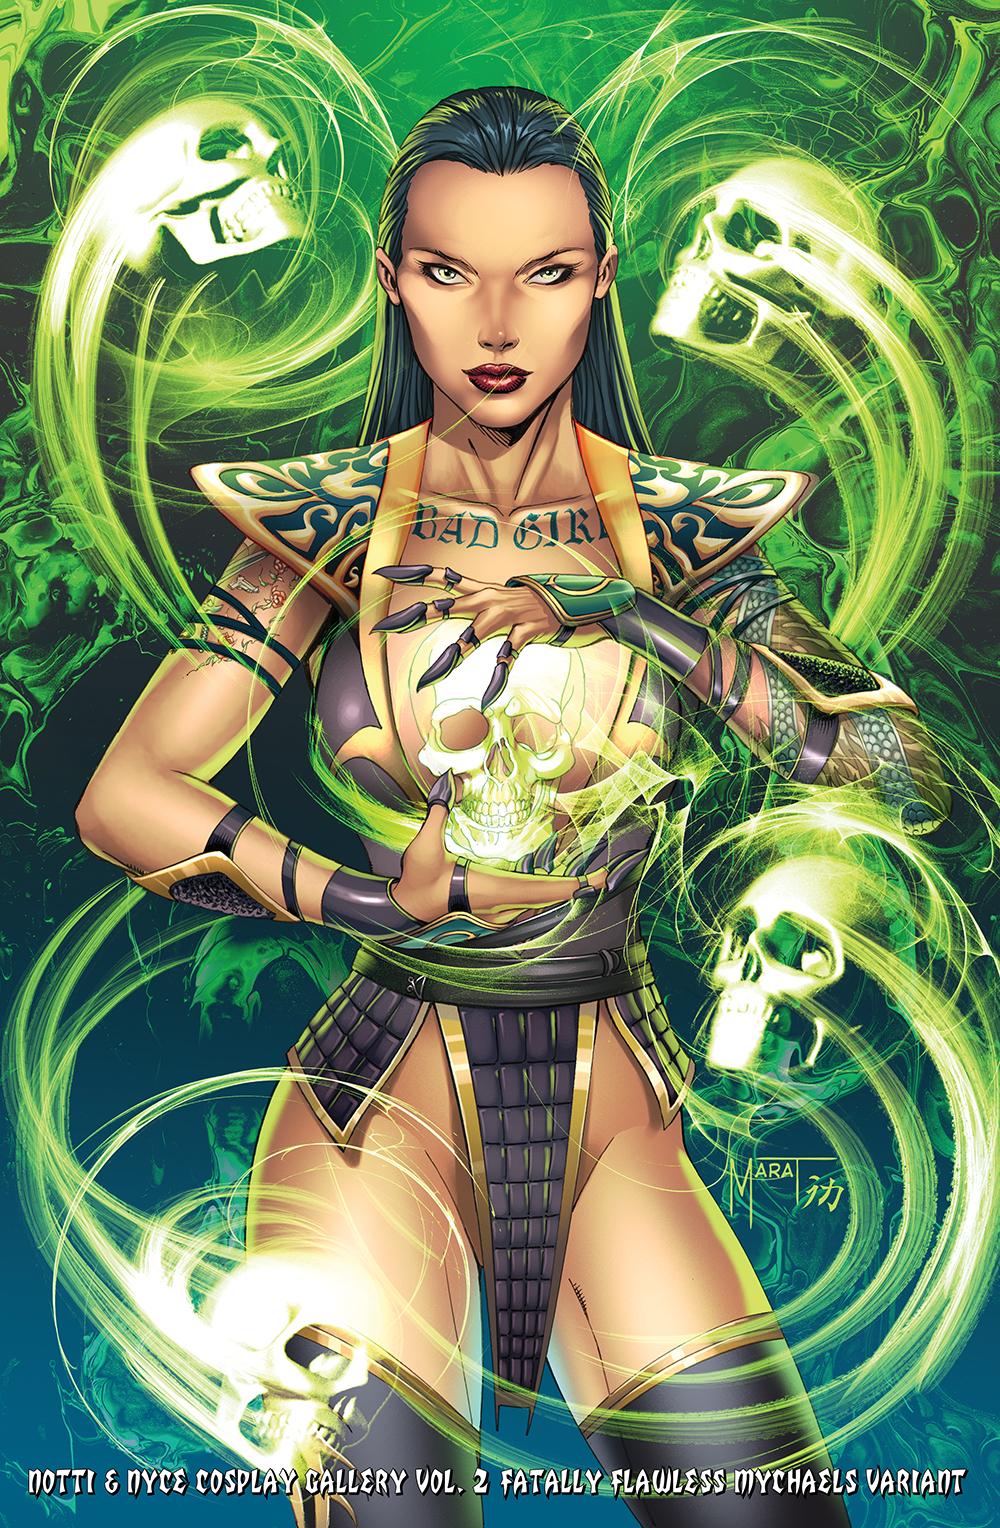 Notti & Nyce Cosplay Gallery Vol. 2 Fatally Flawless Mortal Kombat Shang Tsung Homage Variant Cover by Marat Mychaels